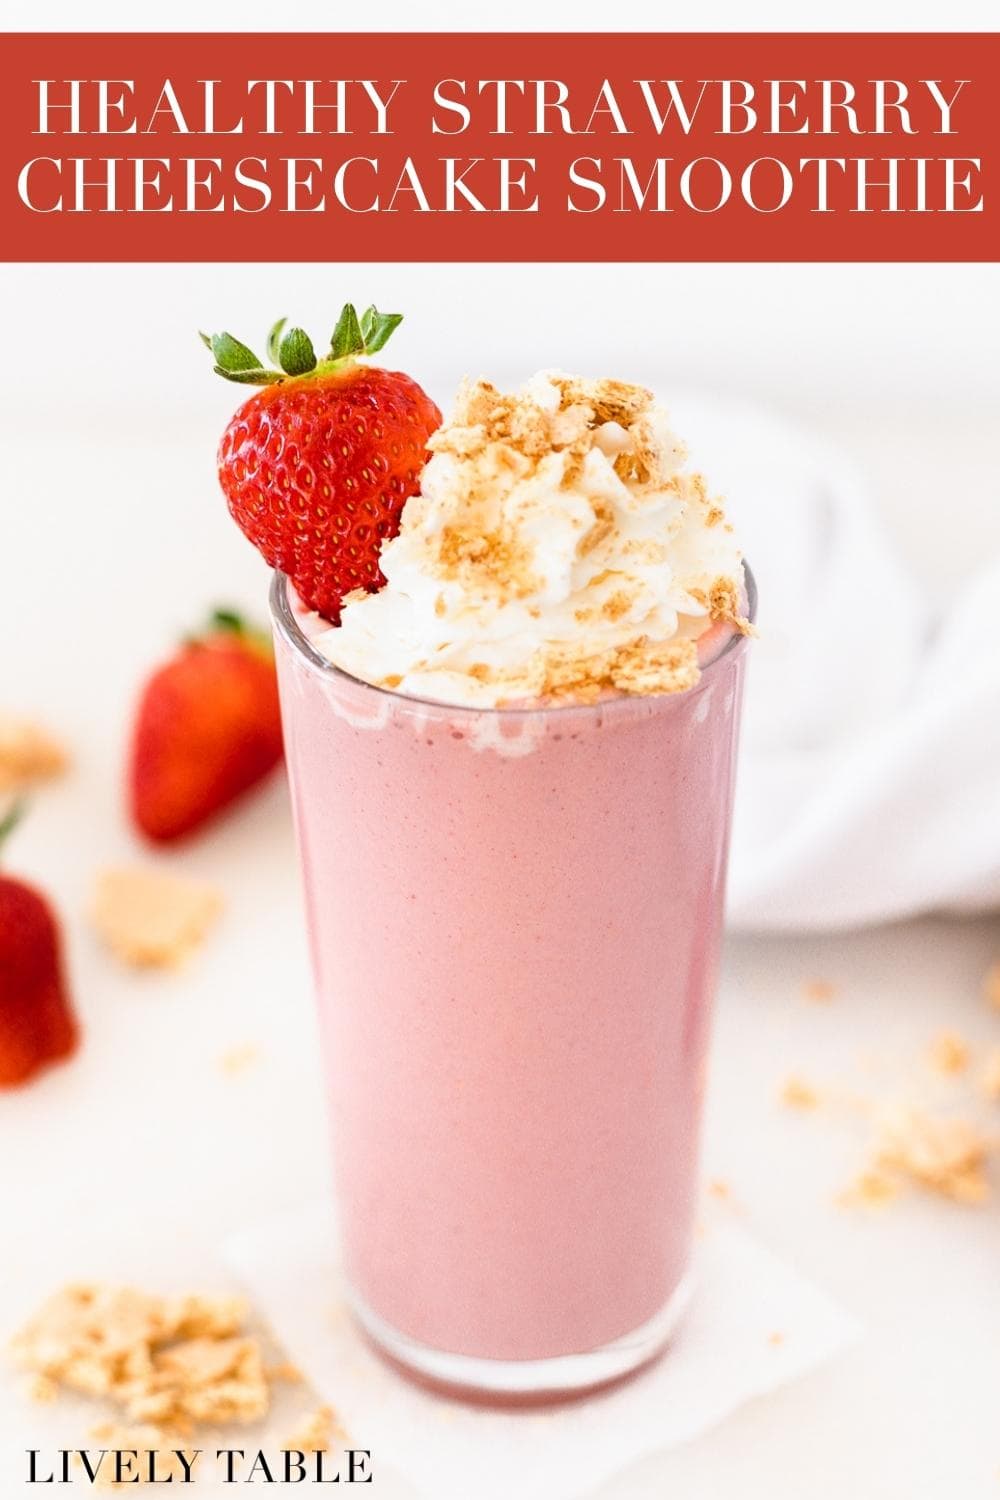 Healthy Strawberry Cheesecake Smoothie - Lively Table